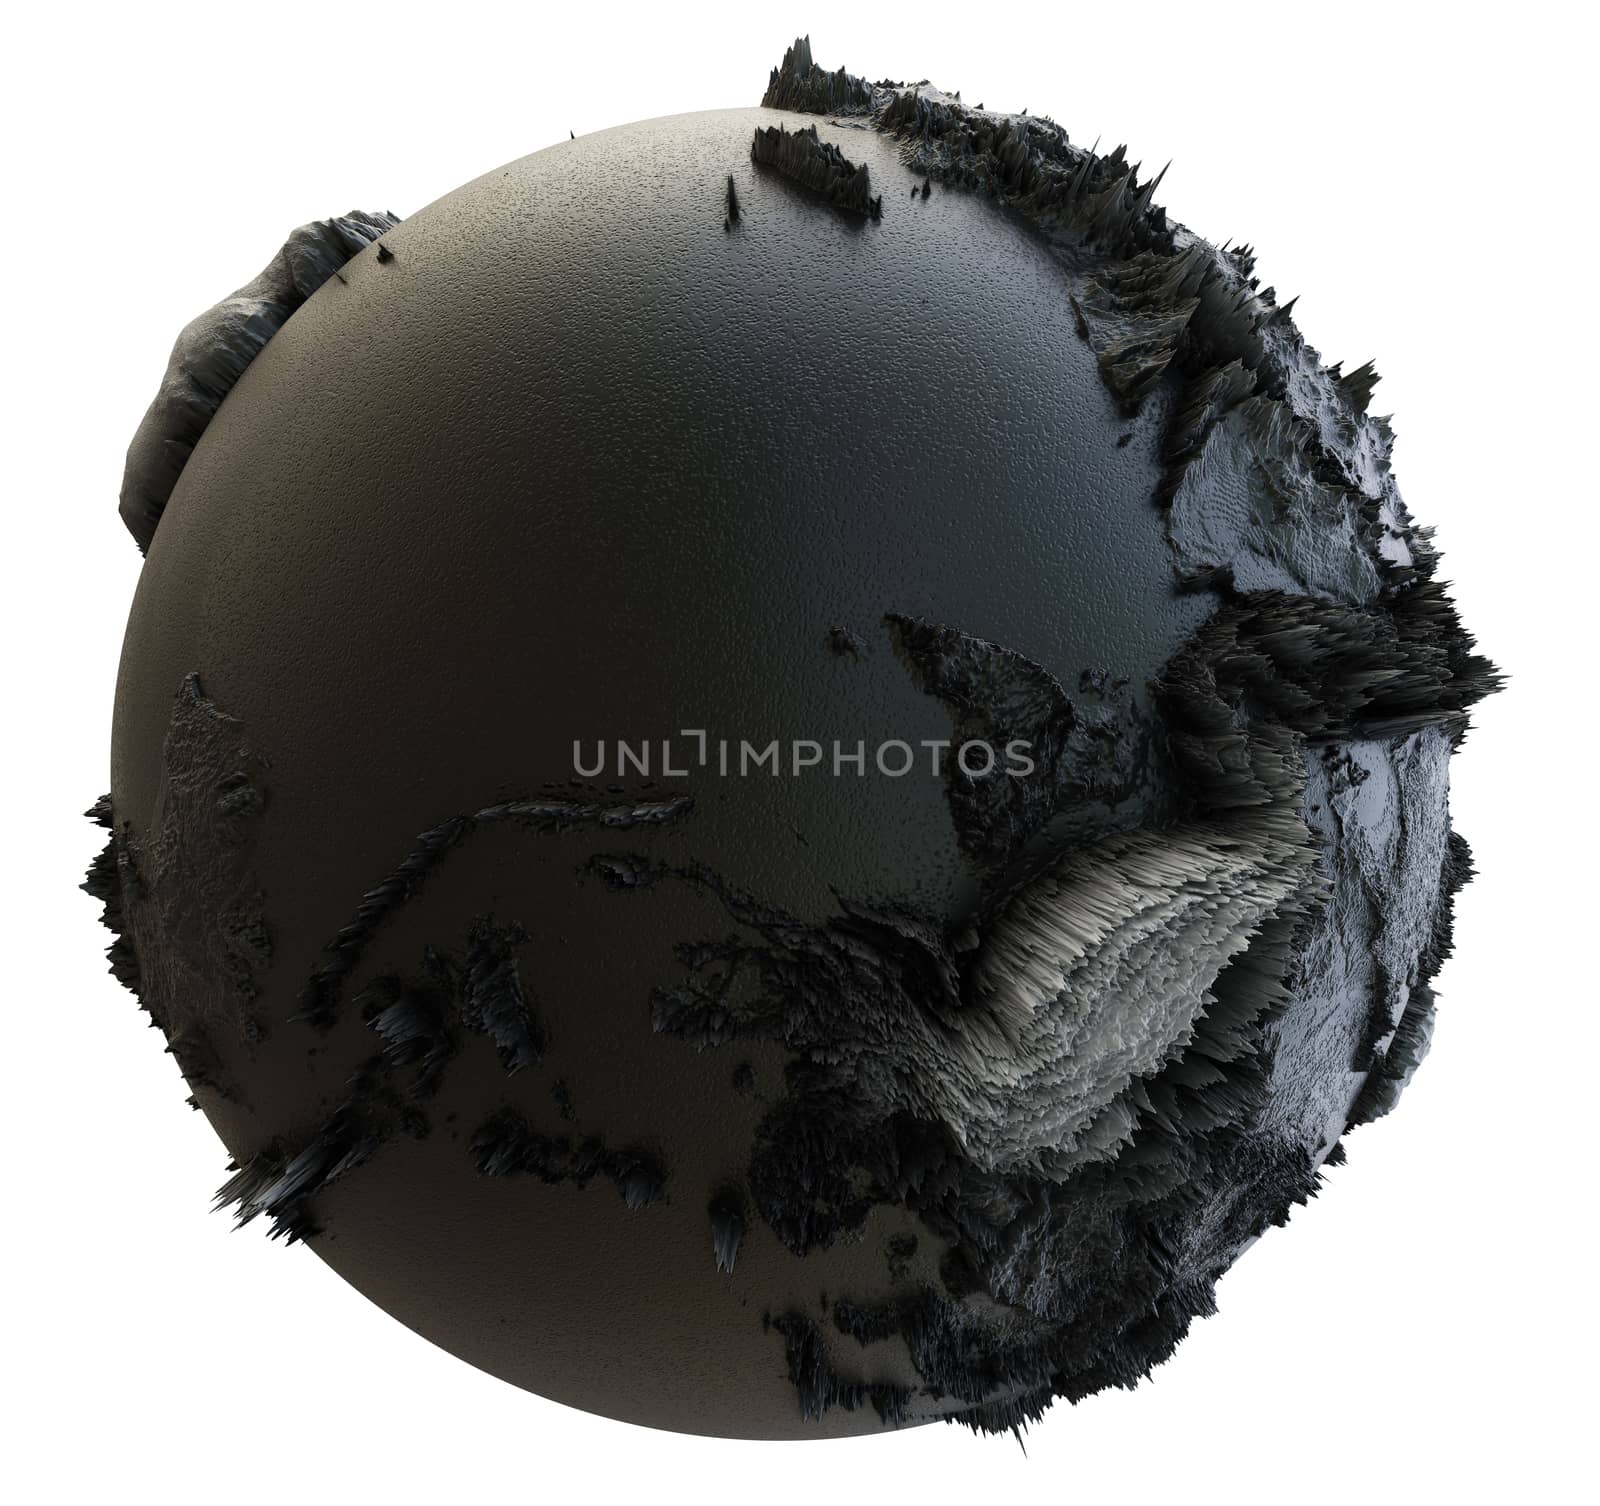 Abstract Black Earth Globe, Continets Extruded or Displacement. 3D illustration